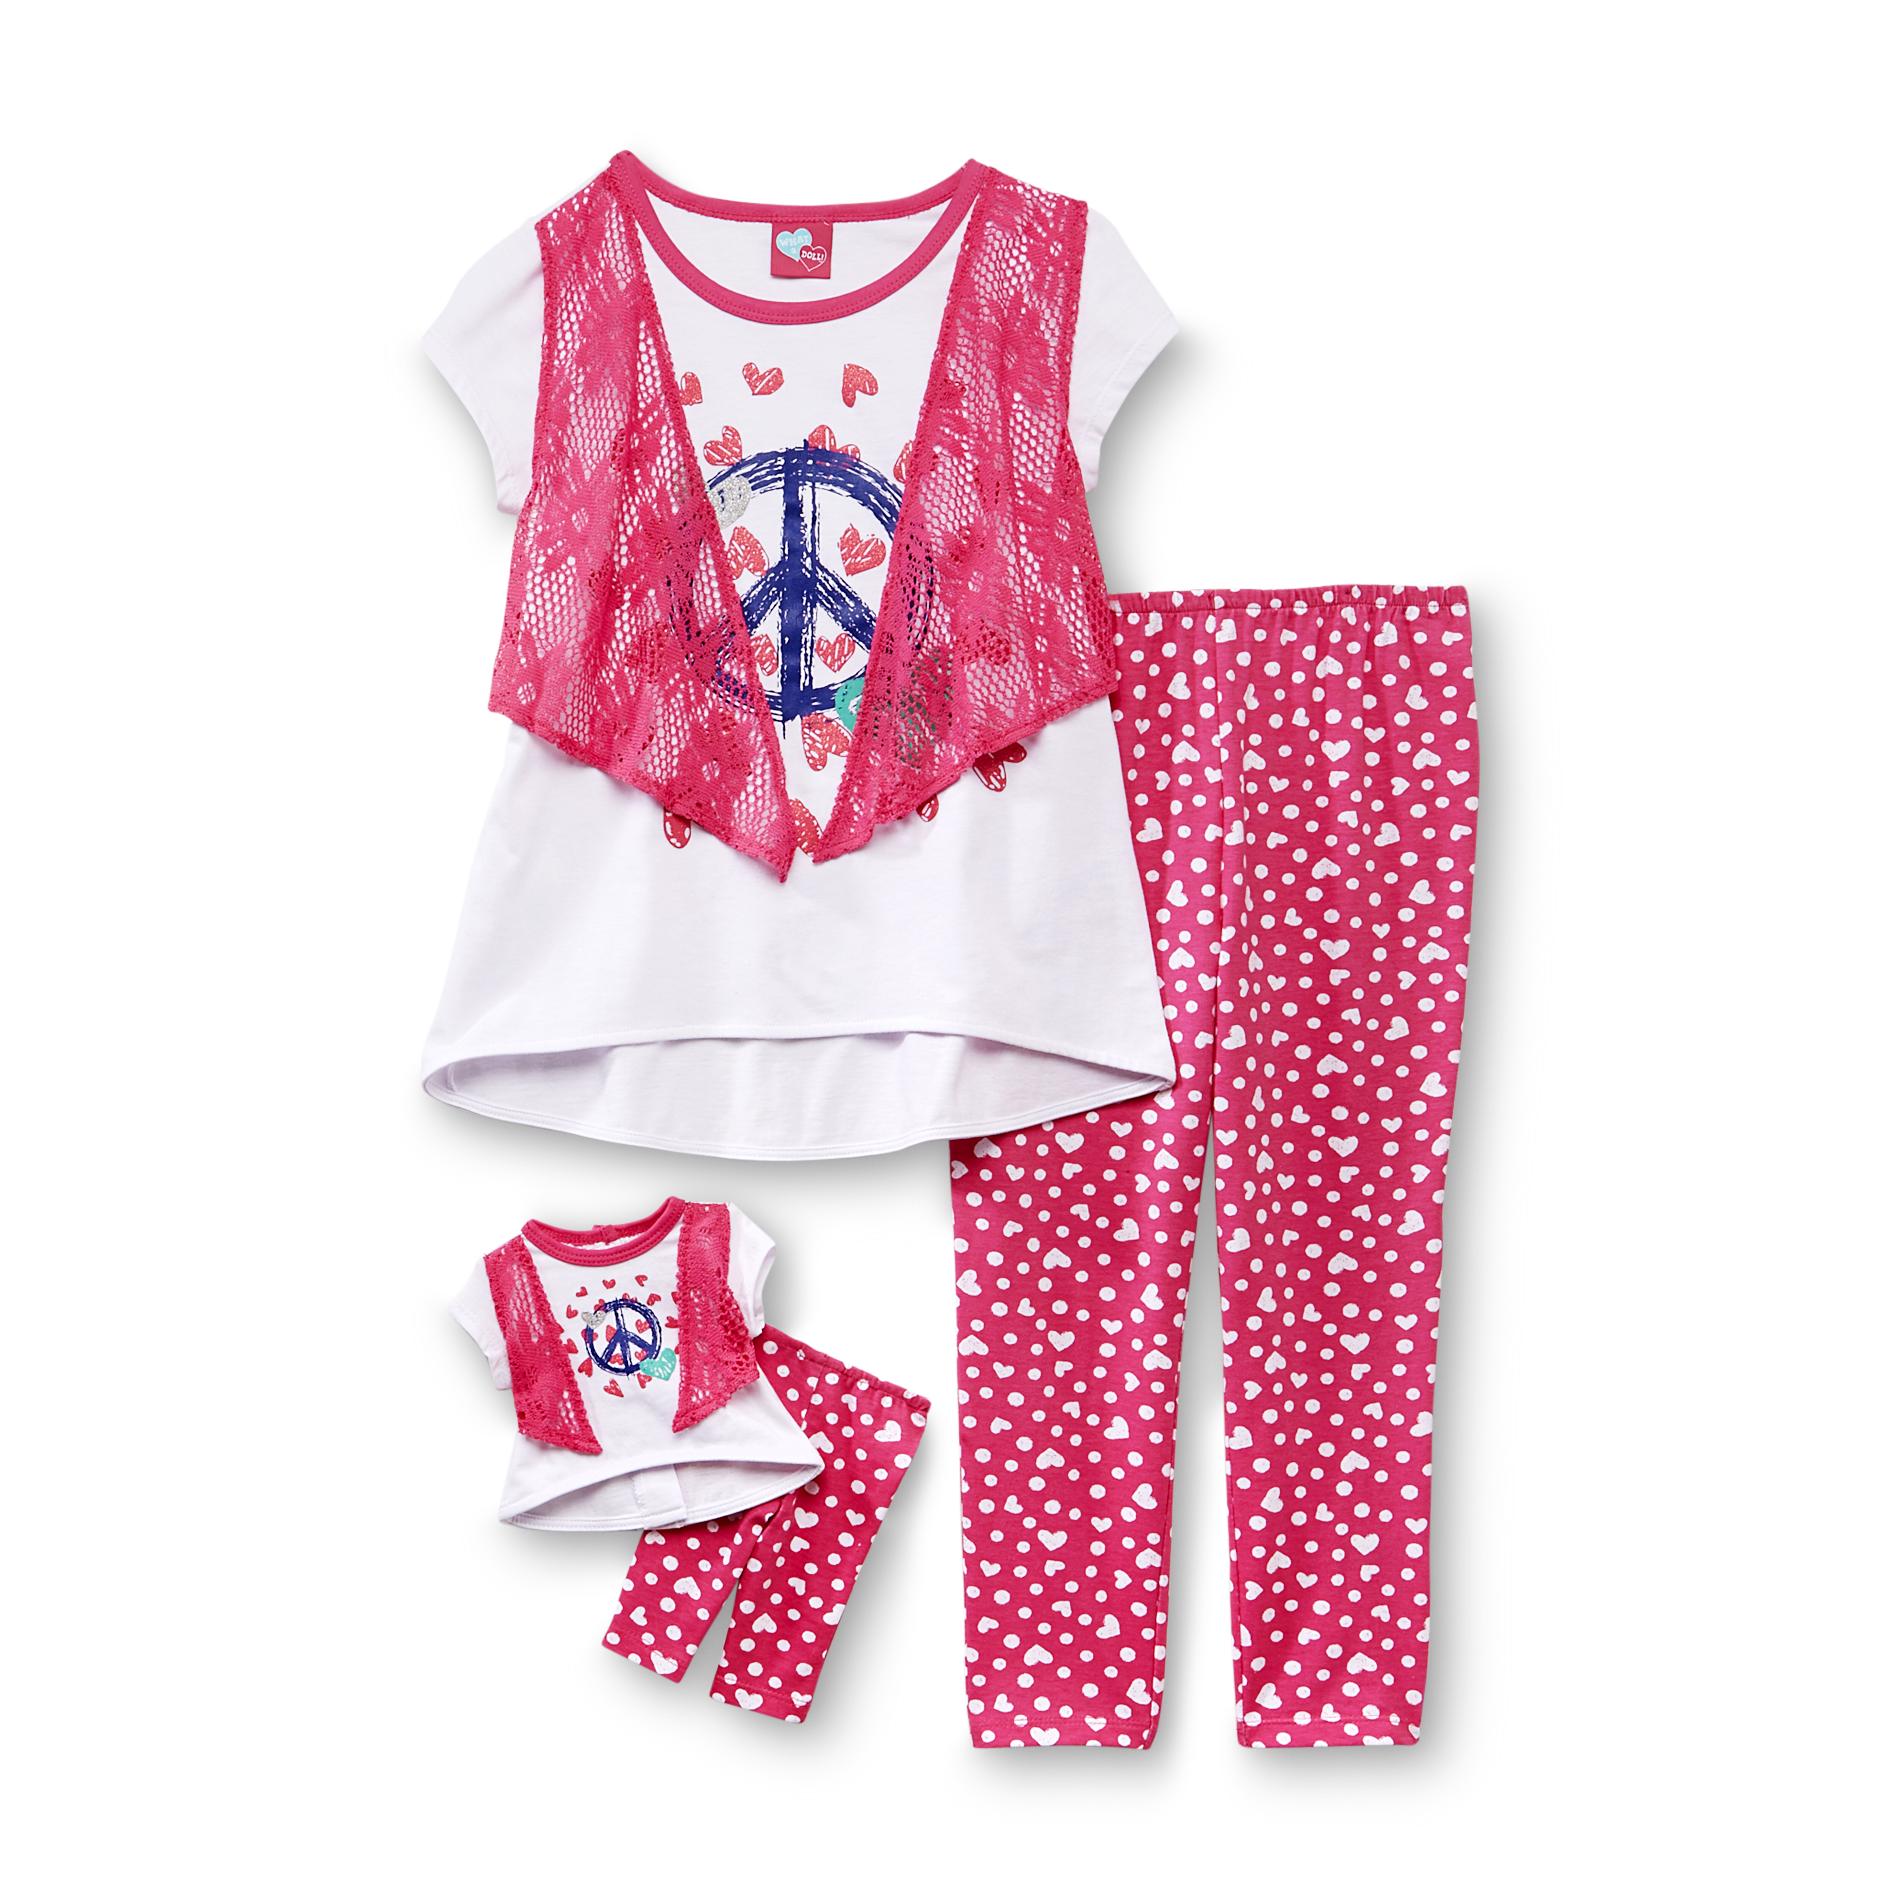 What A Doll Girl's Tunic  Cropped Leggings & Doll Outfit - Peace Sign & Hearts